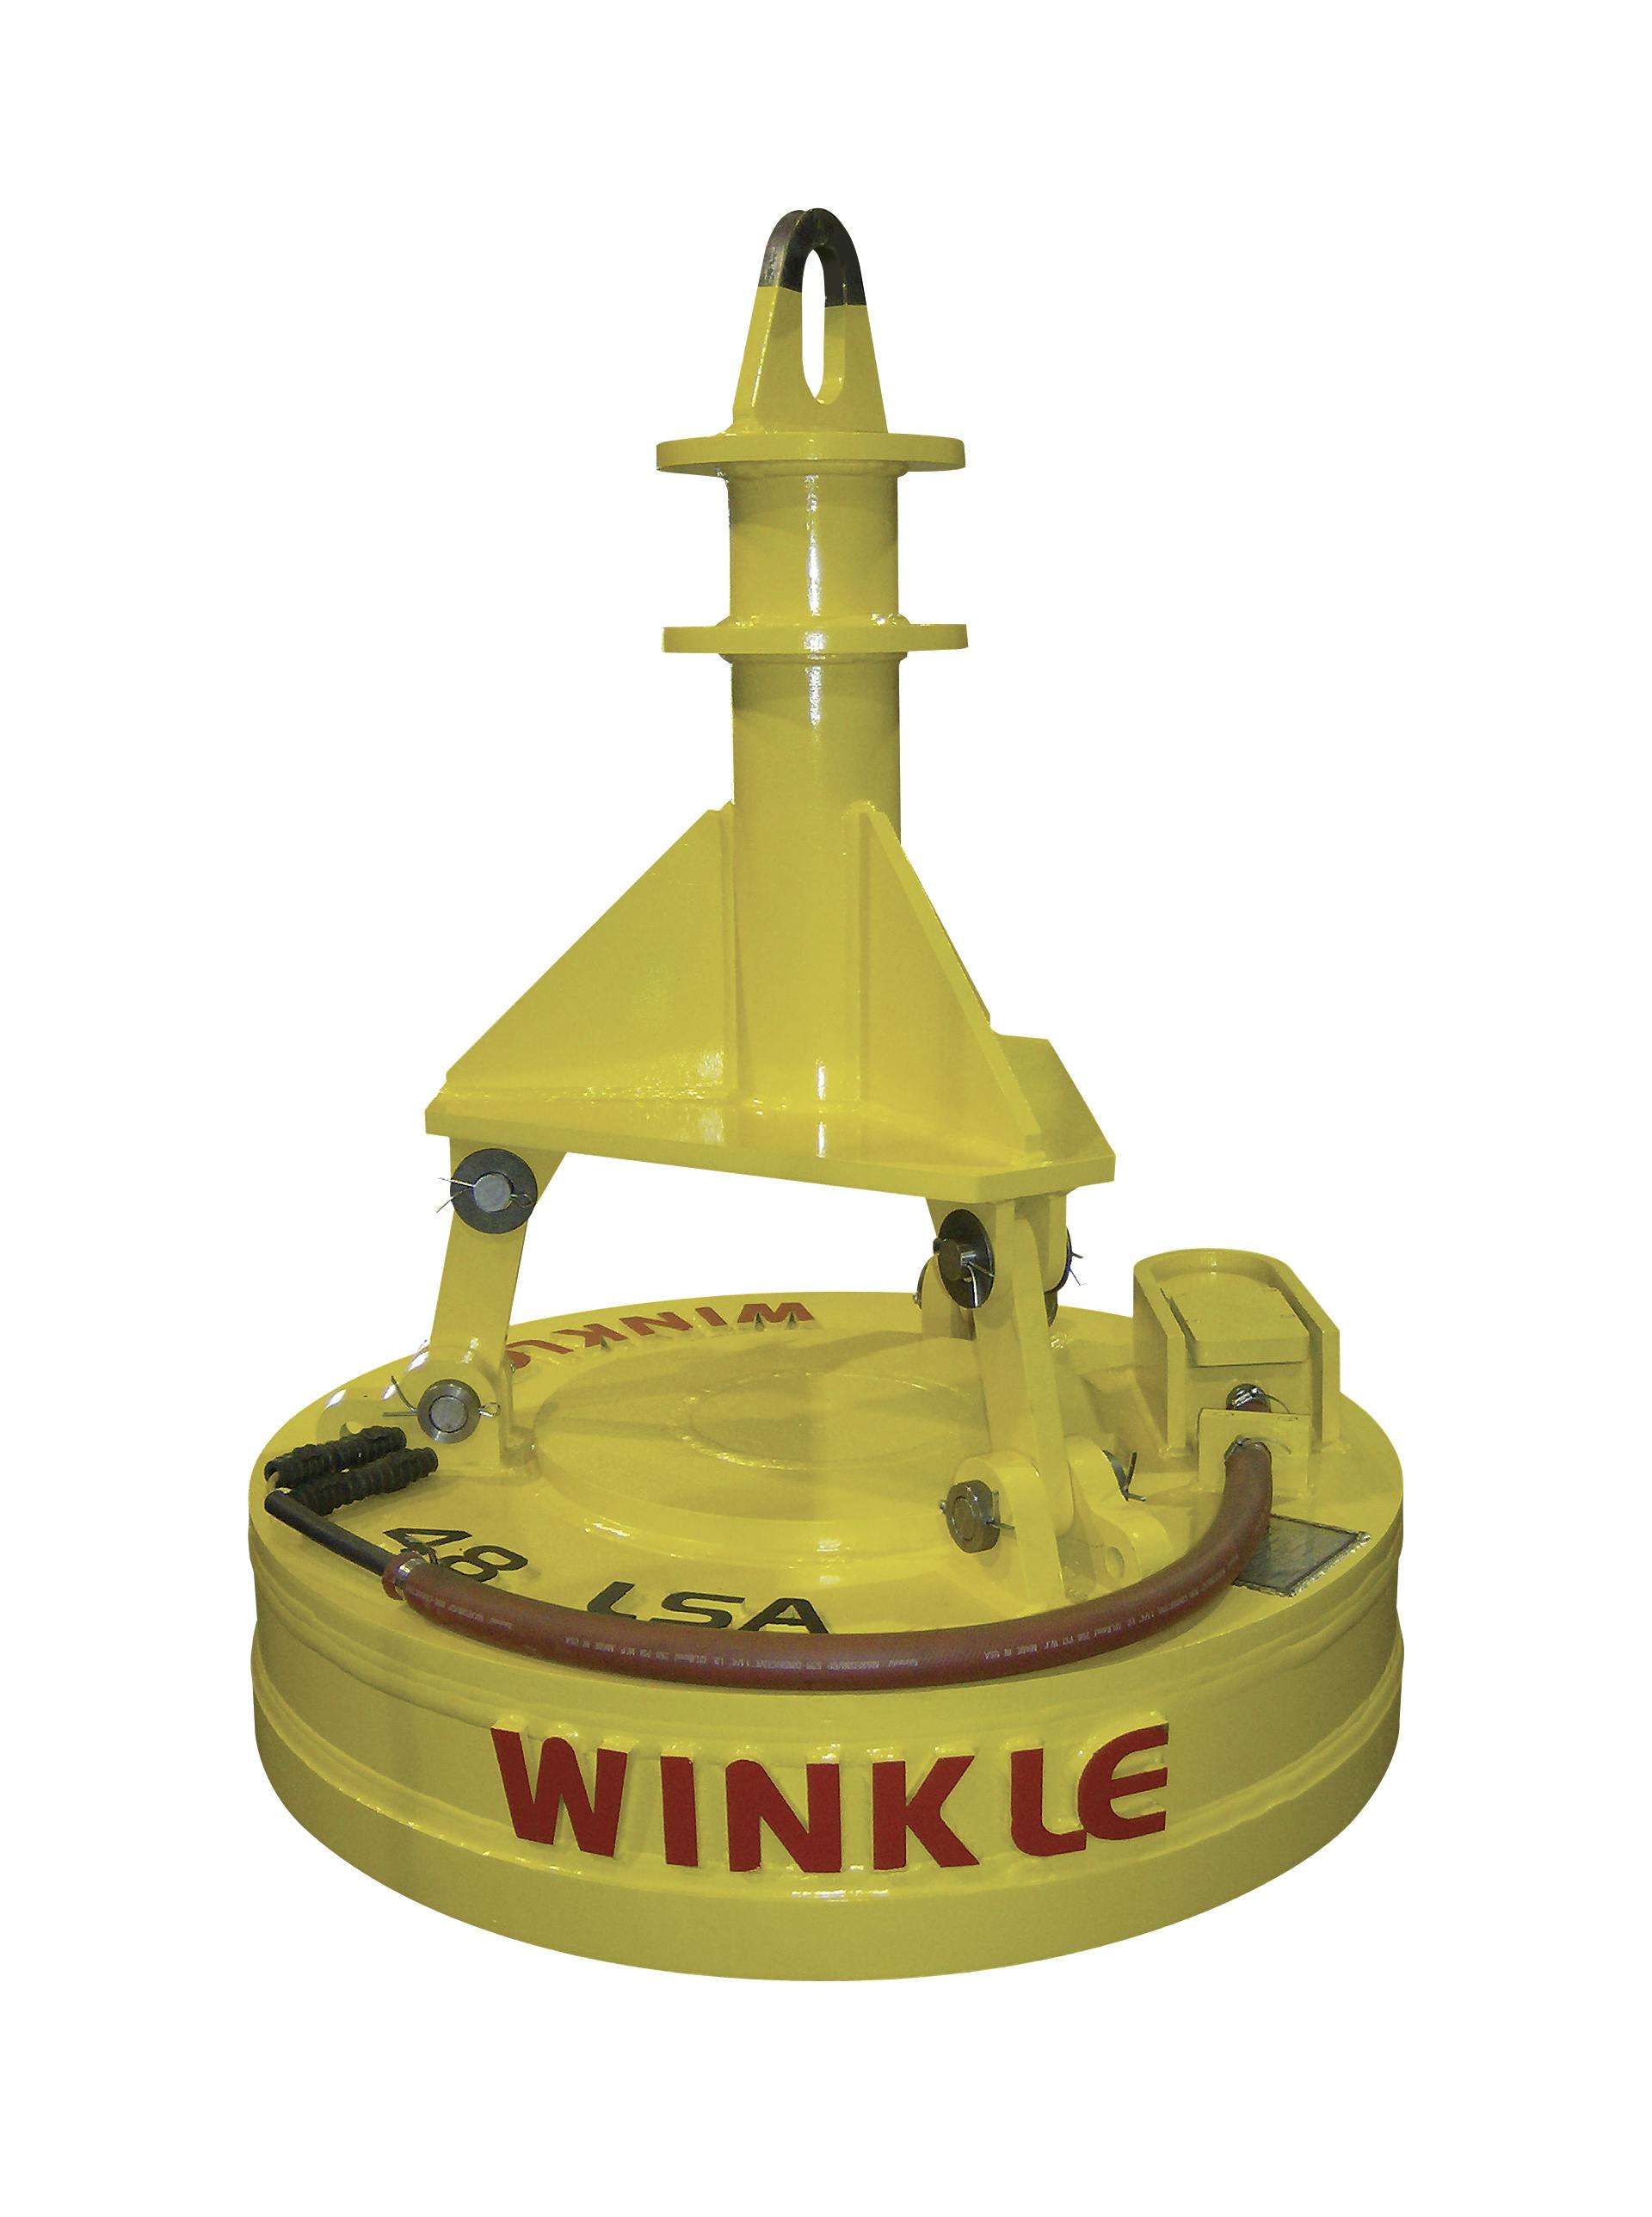 New Winkle Product Combines Grapple and Magnet on the Fly